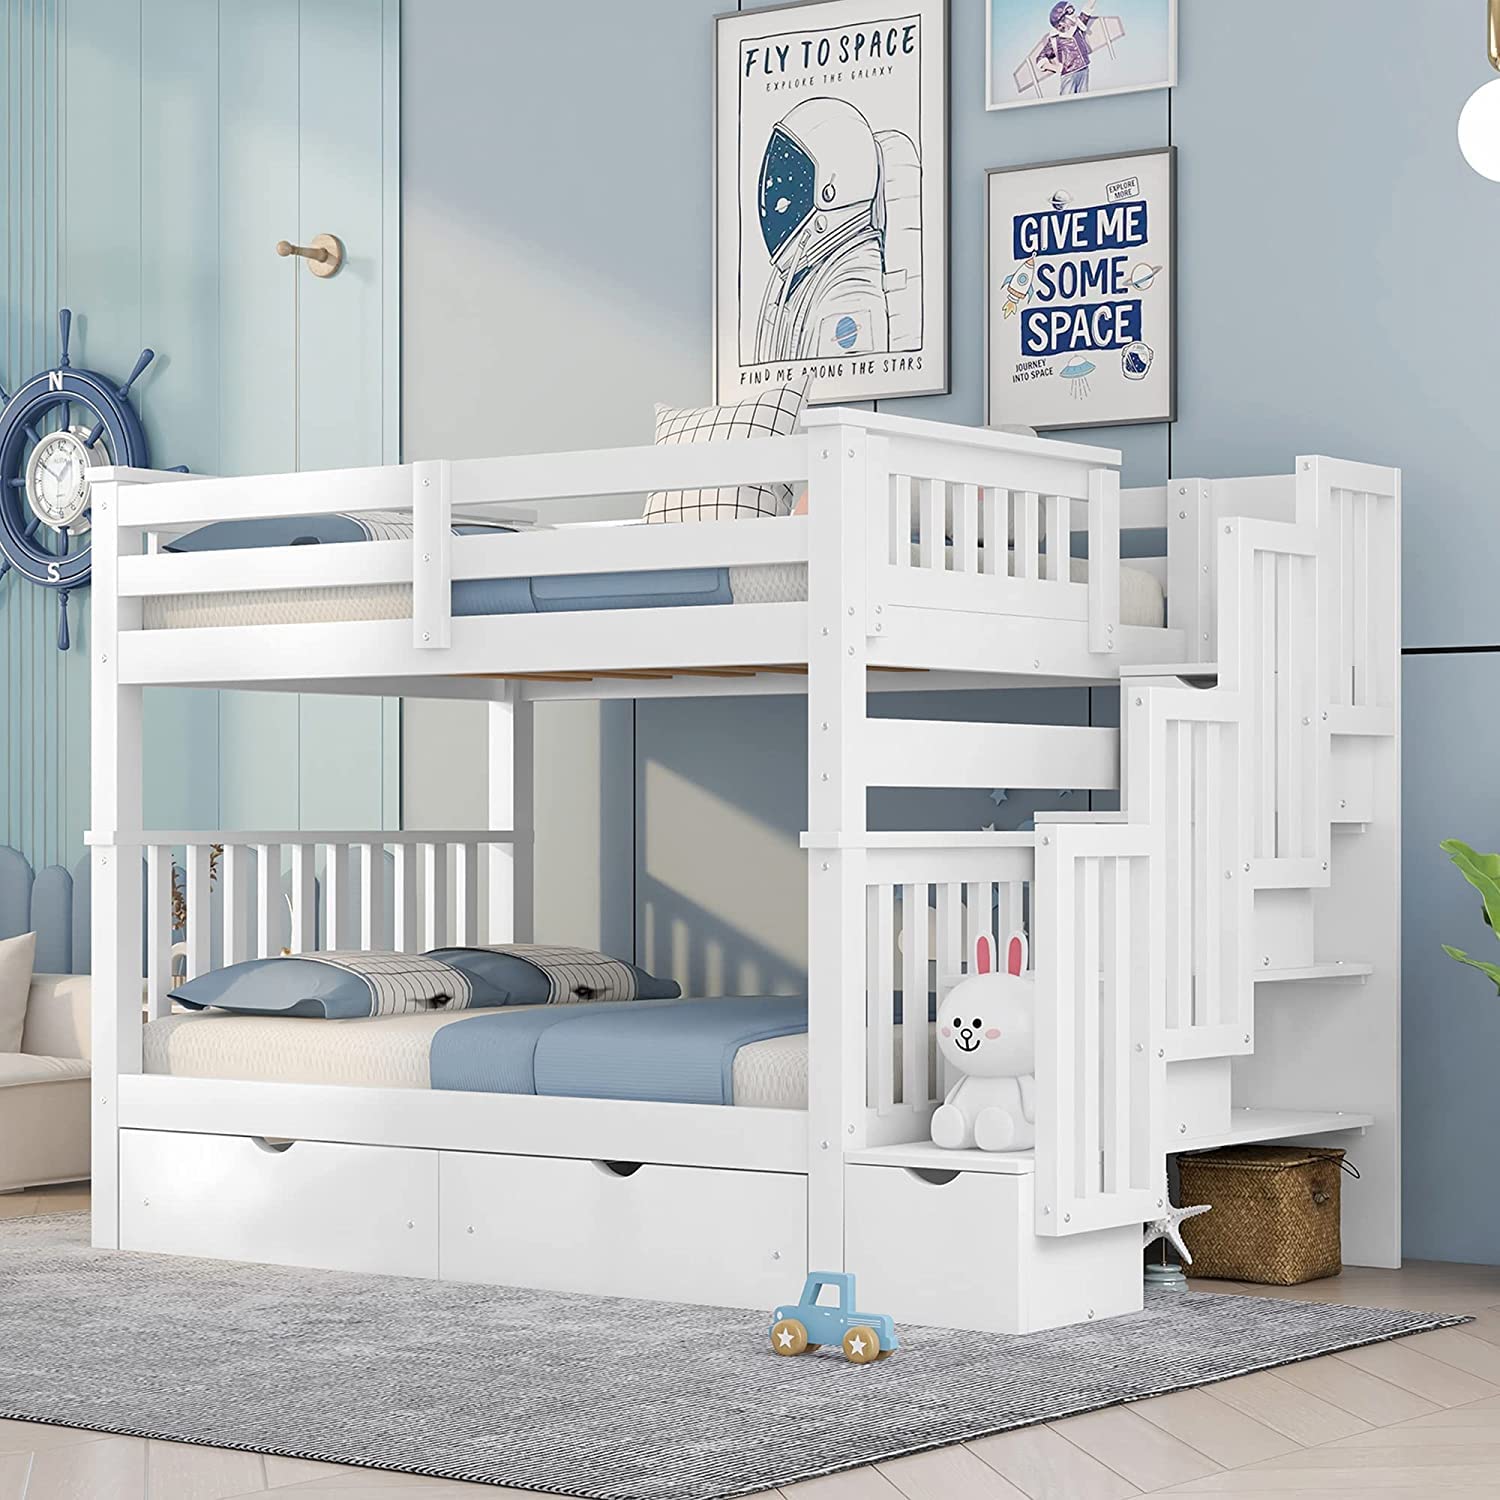 Harper & Bright Desi Full Over Full Bunk Bed with Stairs for Adults ,Wooden Full Bunk Beds with 6 Storage Drawers and Shelves, Detachable Full Size B